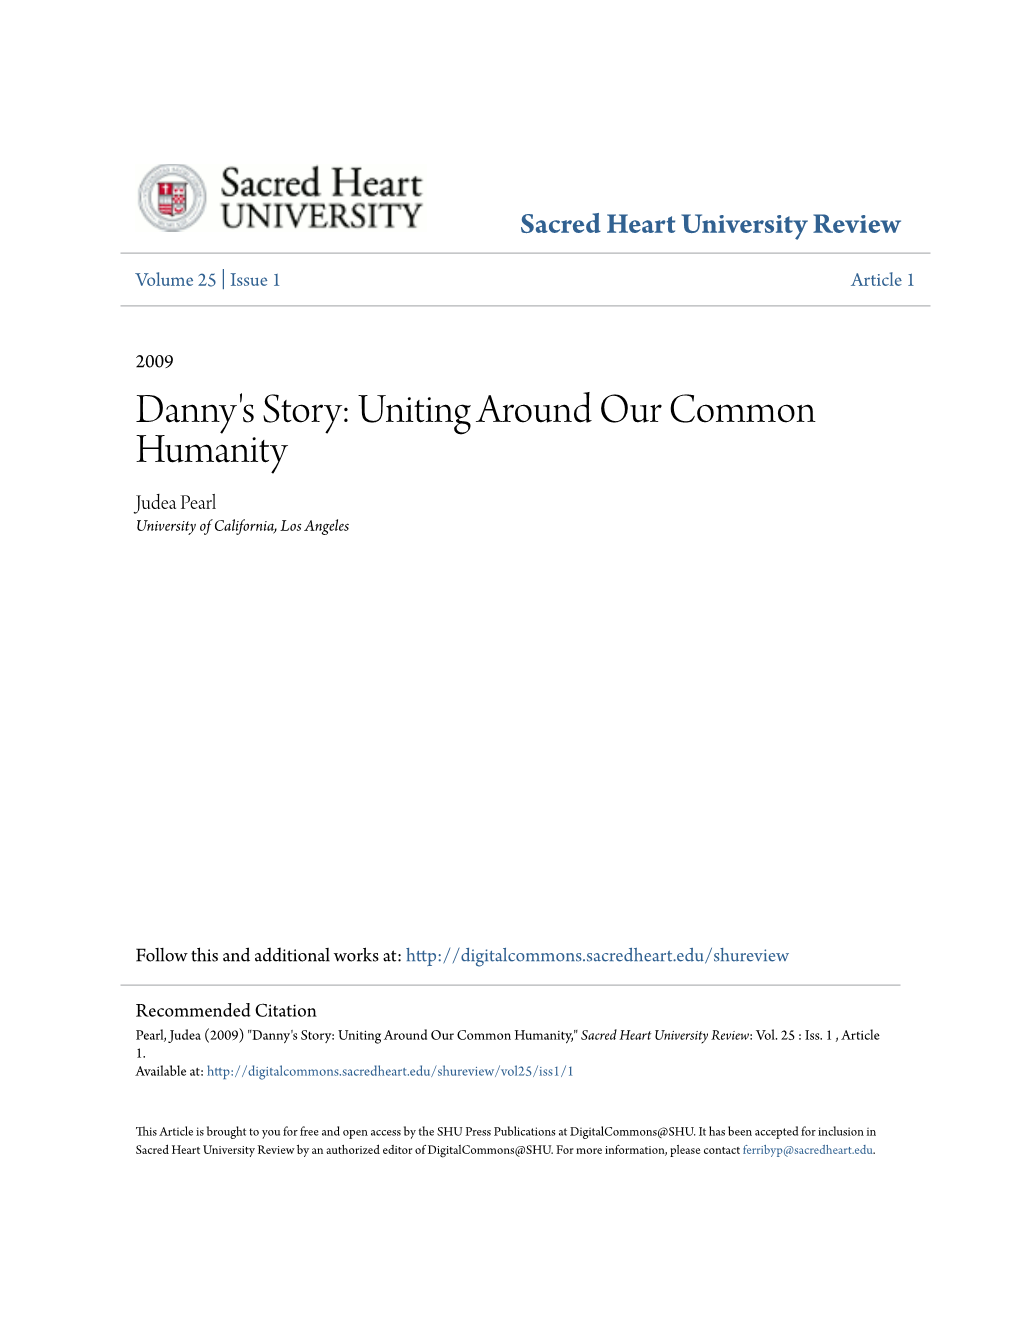 Danny's Story: Uniting Around Our Common Humanity Judea Pearl University of California, Los Angeles